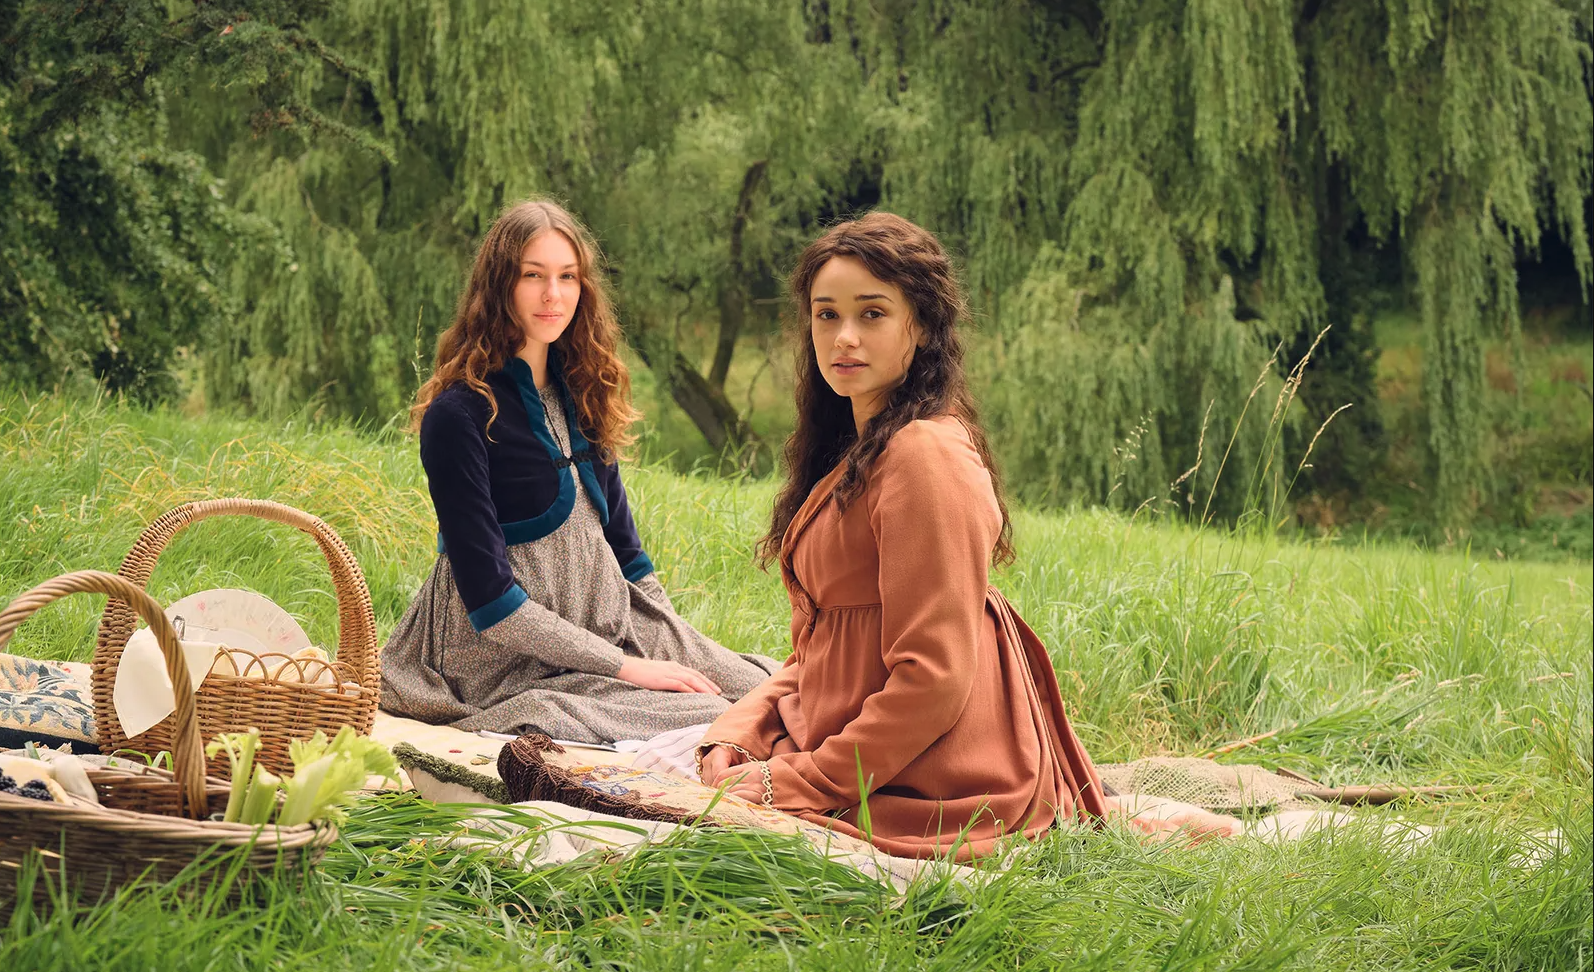 Rose williams as charlotte heywood and Eloise Webb as augusta Markham sit and have a picnic on some grass